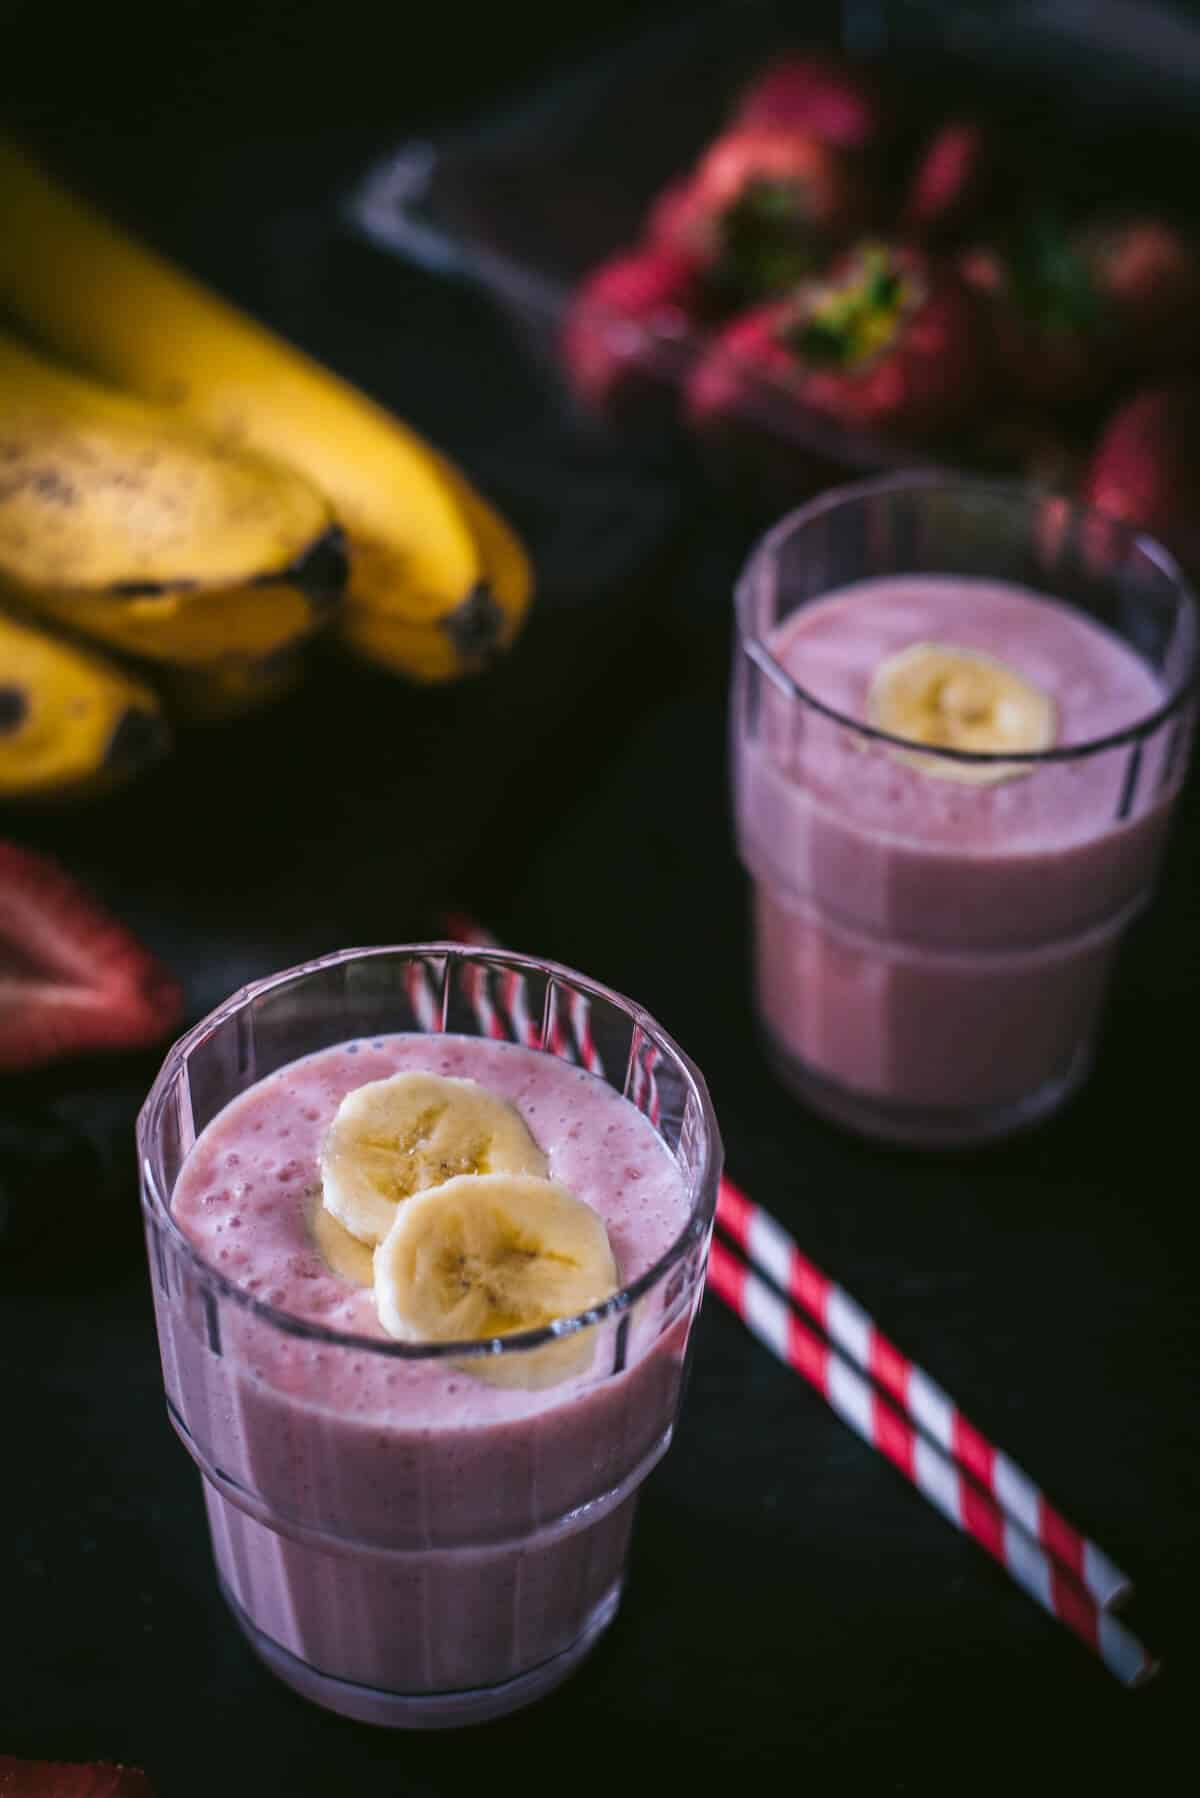 An overhead shot of strawberry banana smoothie in two glass containers and placed on a wooden bowl. There are two red and white straws on the side.